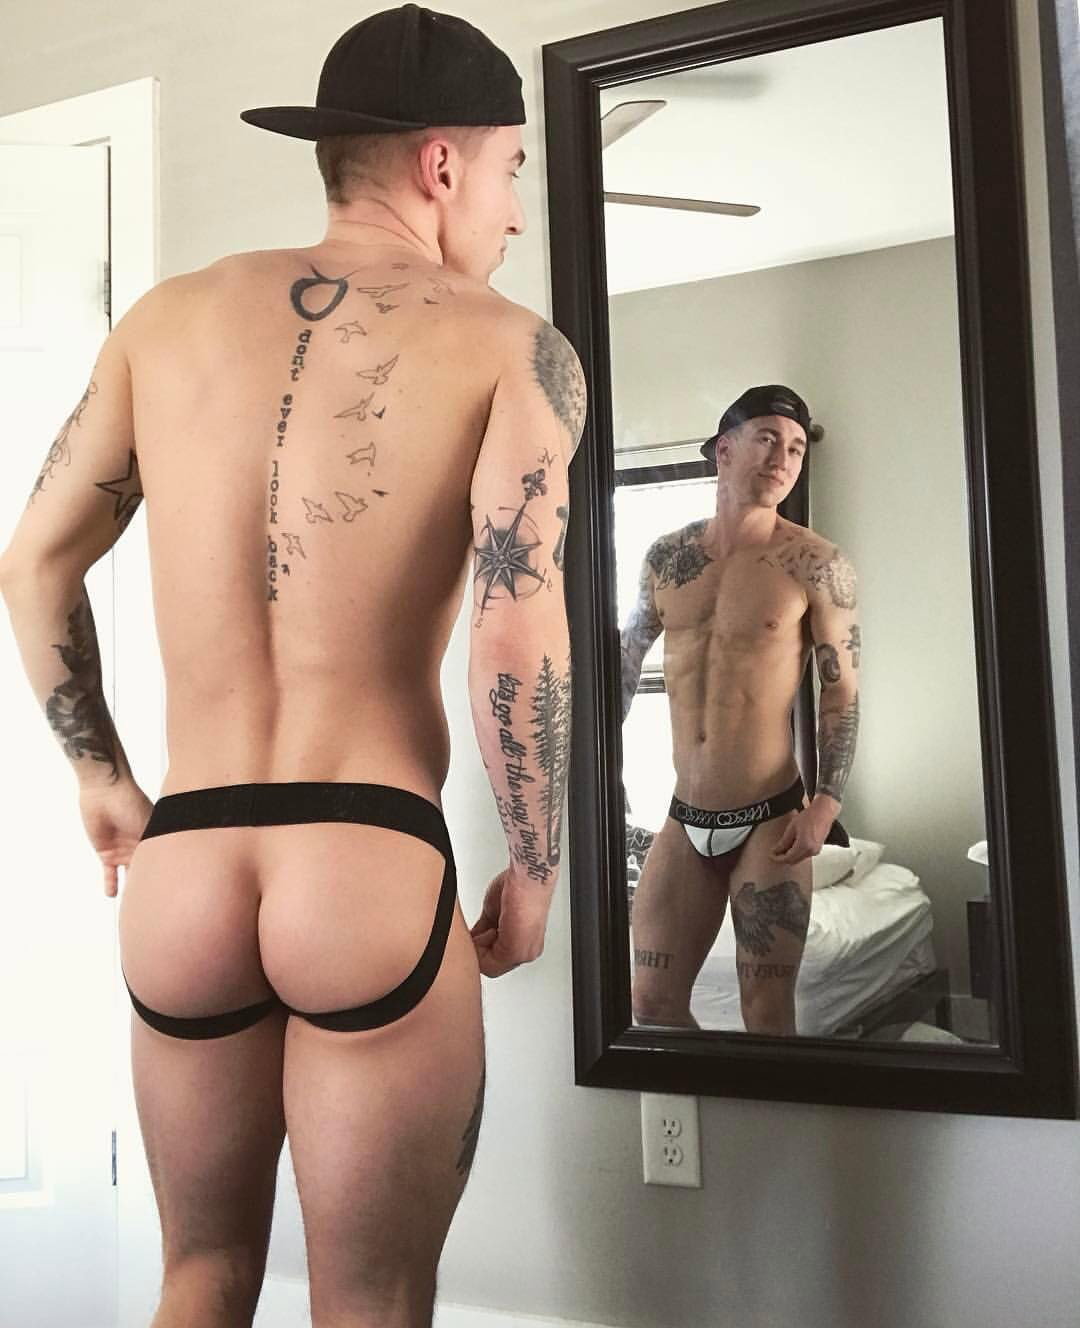 Photo by sydausperv with the username @sydausperv, posted on December 14, 2018. The post is about the topic Guys in Jockstraps